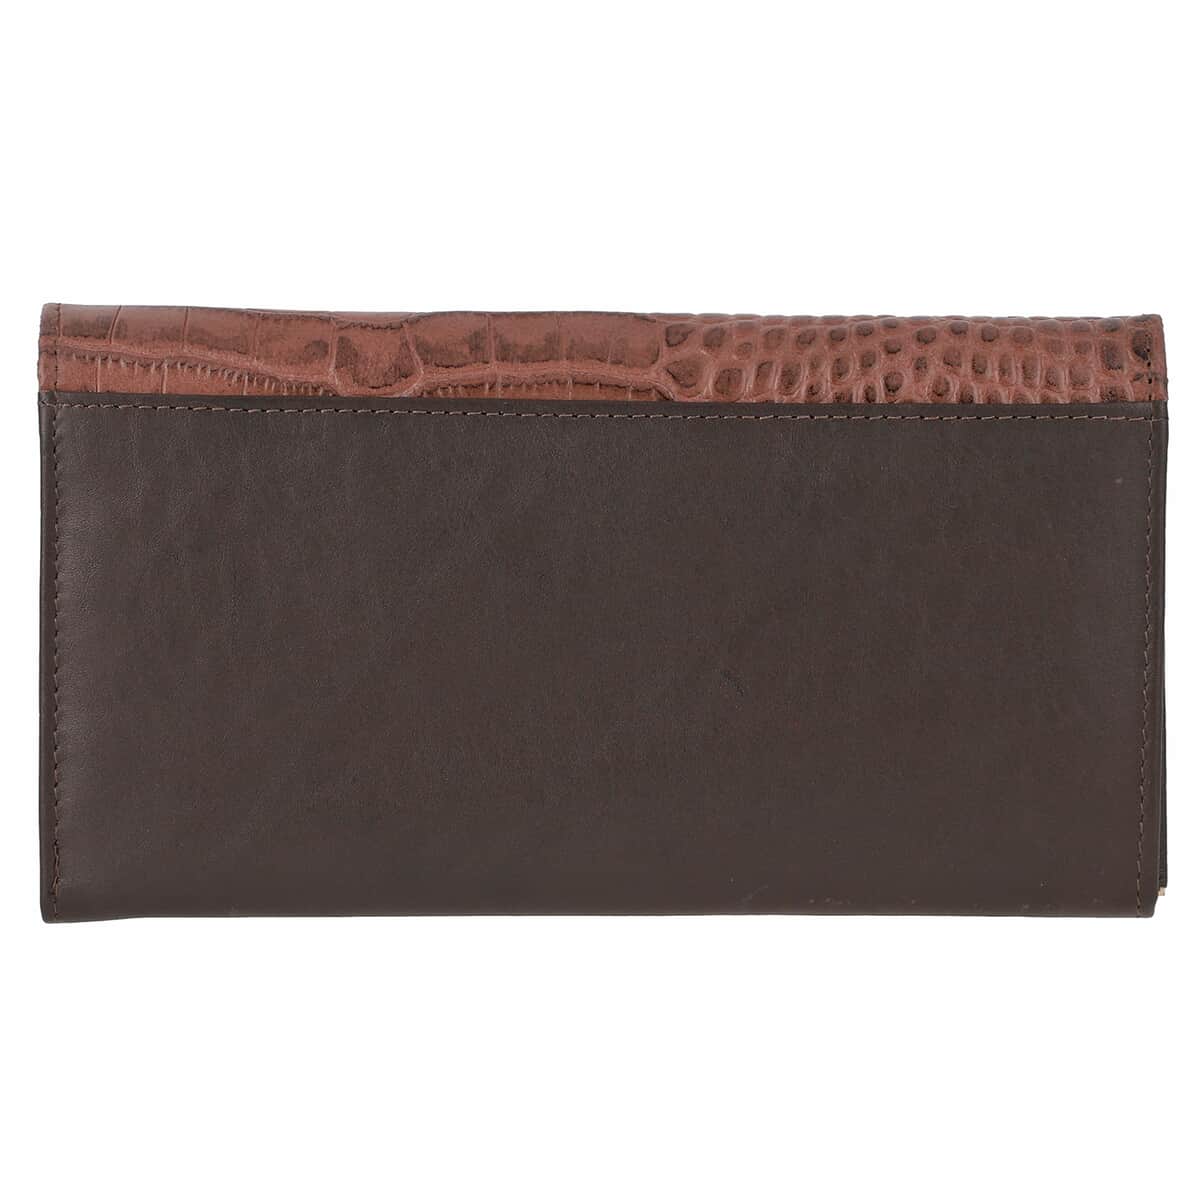 "100% Genuine Leather Wallet SIZE: 7.5(L)x4.5(W)x0.5(H) inches COLOR: Black" image number 6